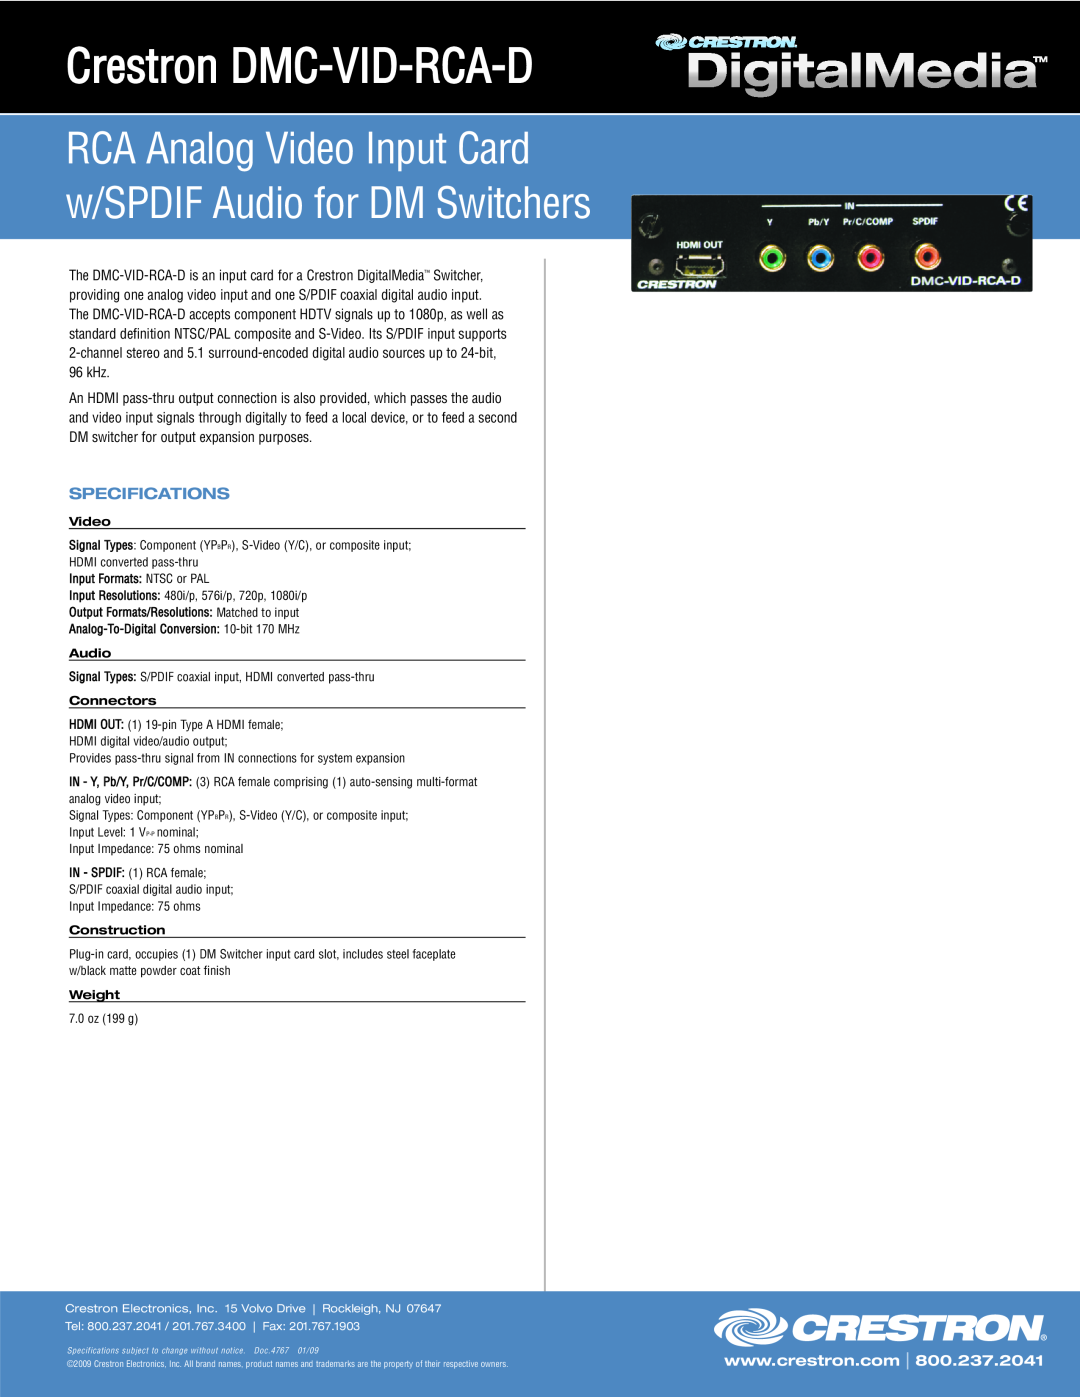 Crestron electronic specifications Crestron DMC-VID-RCA-D, RCA Analog Video Input Card w/SPDIF Audio for DM Switchers 